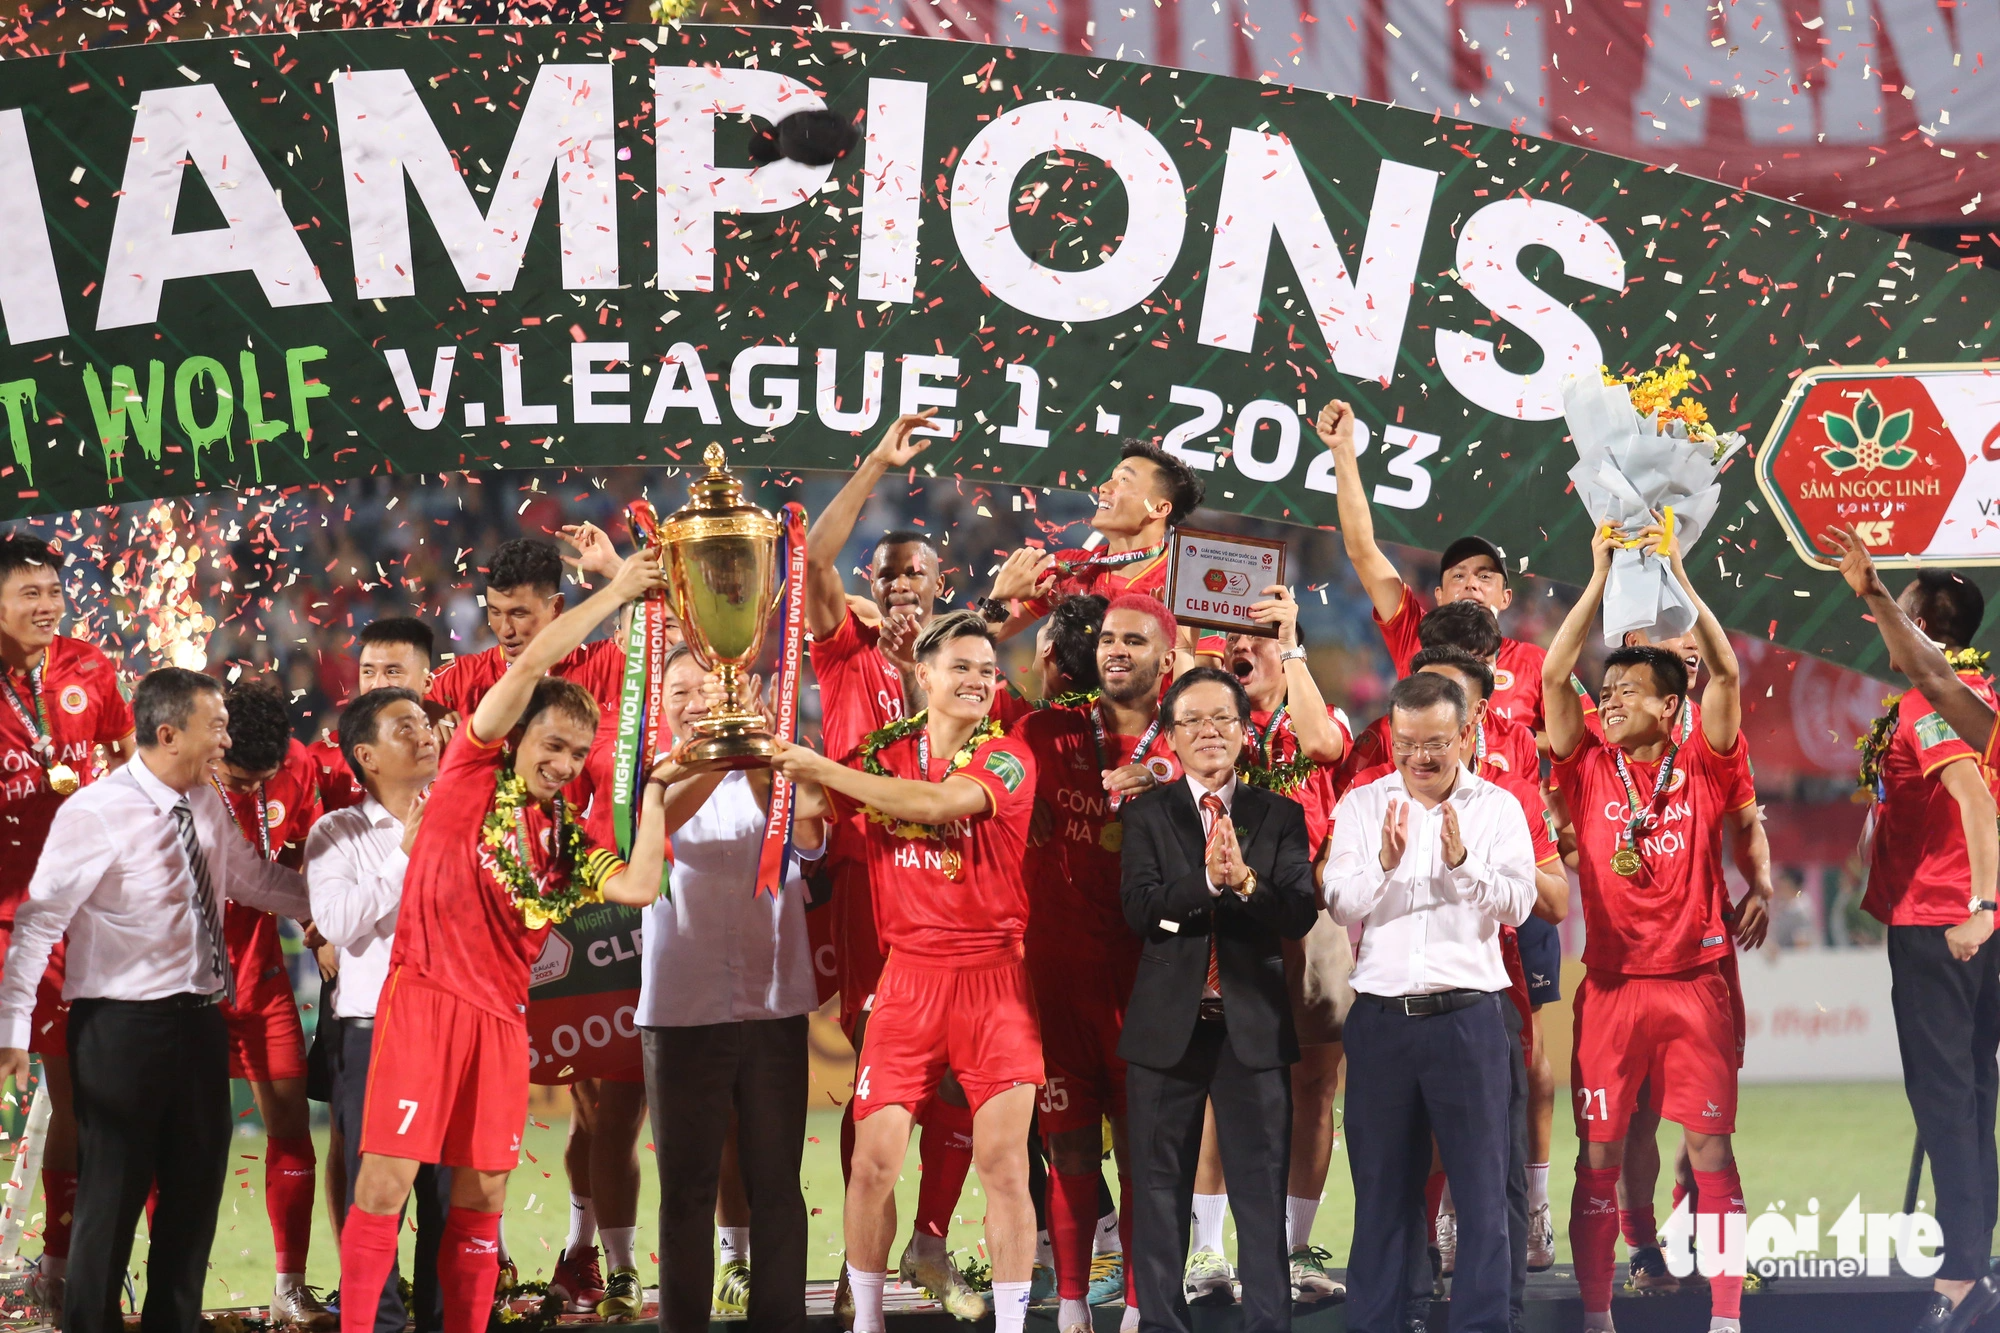 Cong An Hanoi FC players celebrate with the trophy after winning the V-League 1 2023 at Hang Day Stadium in Hanoi, August 27, 2023. Photo: Nam Tran / Tuoi Tre